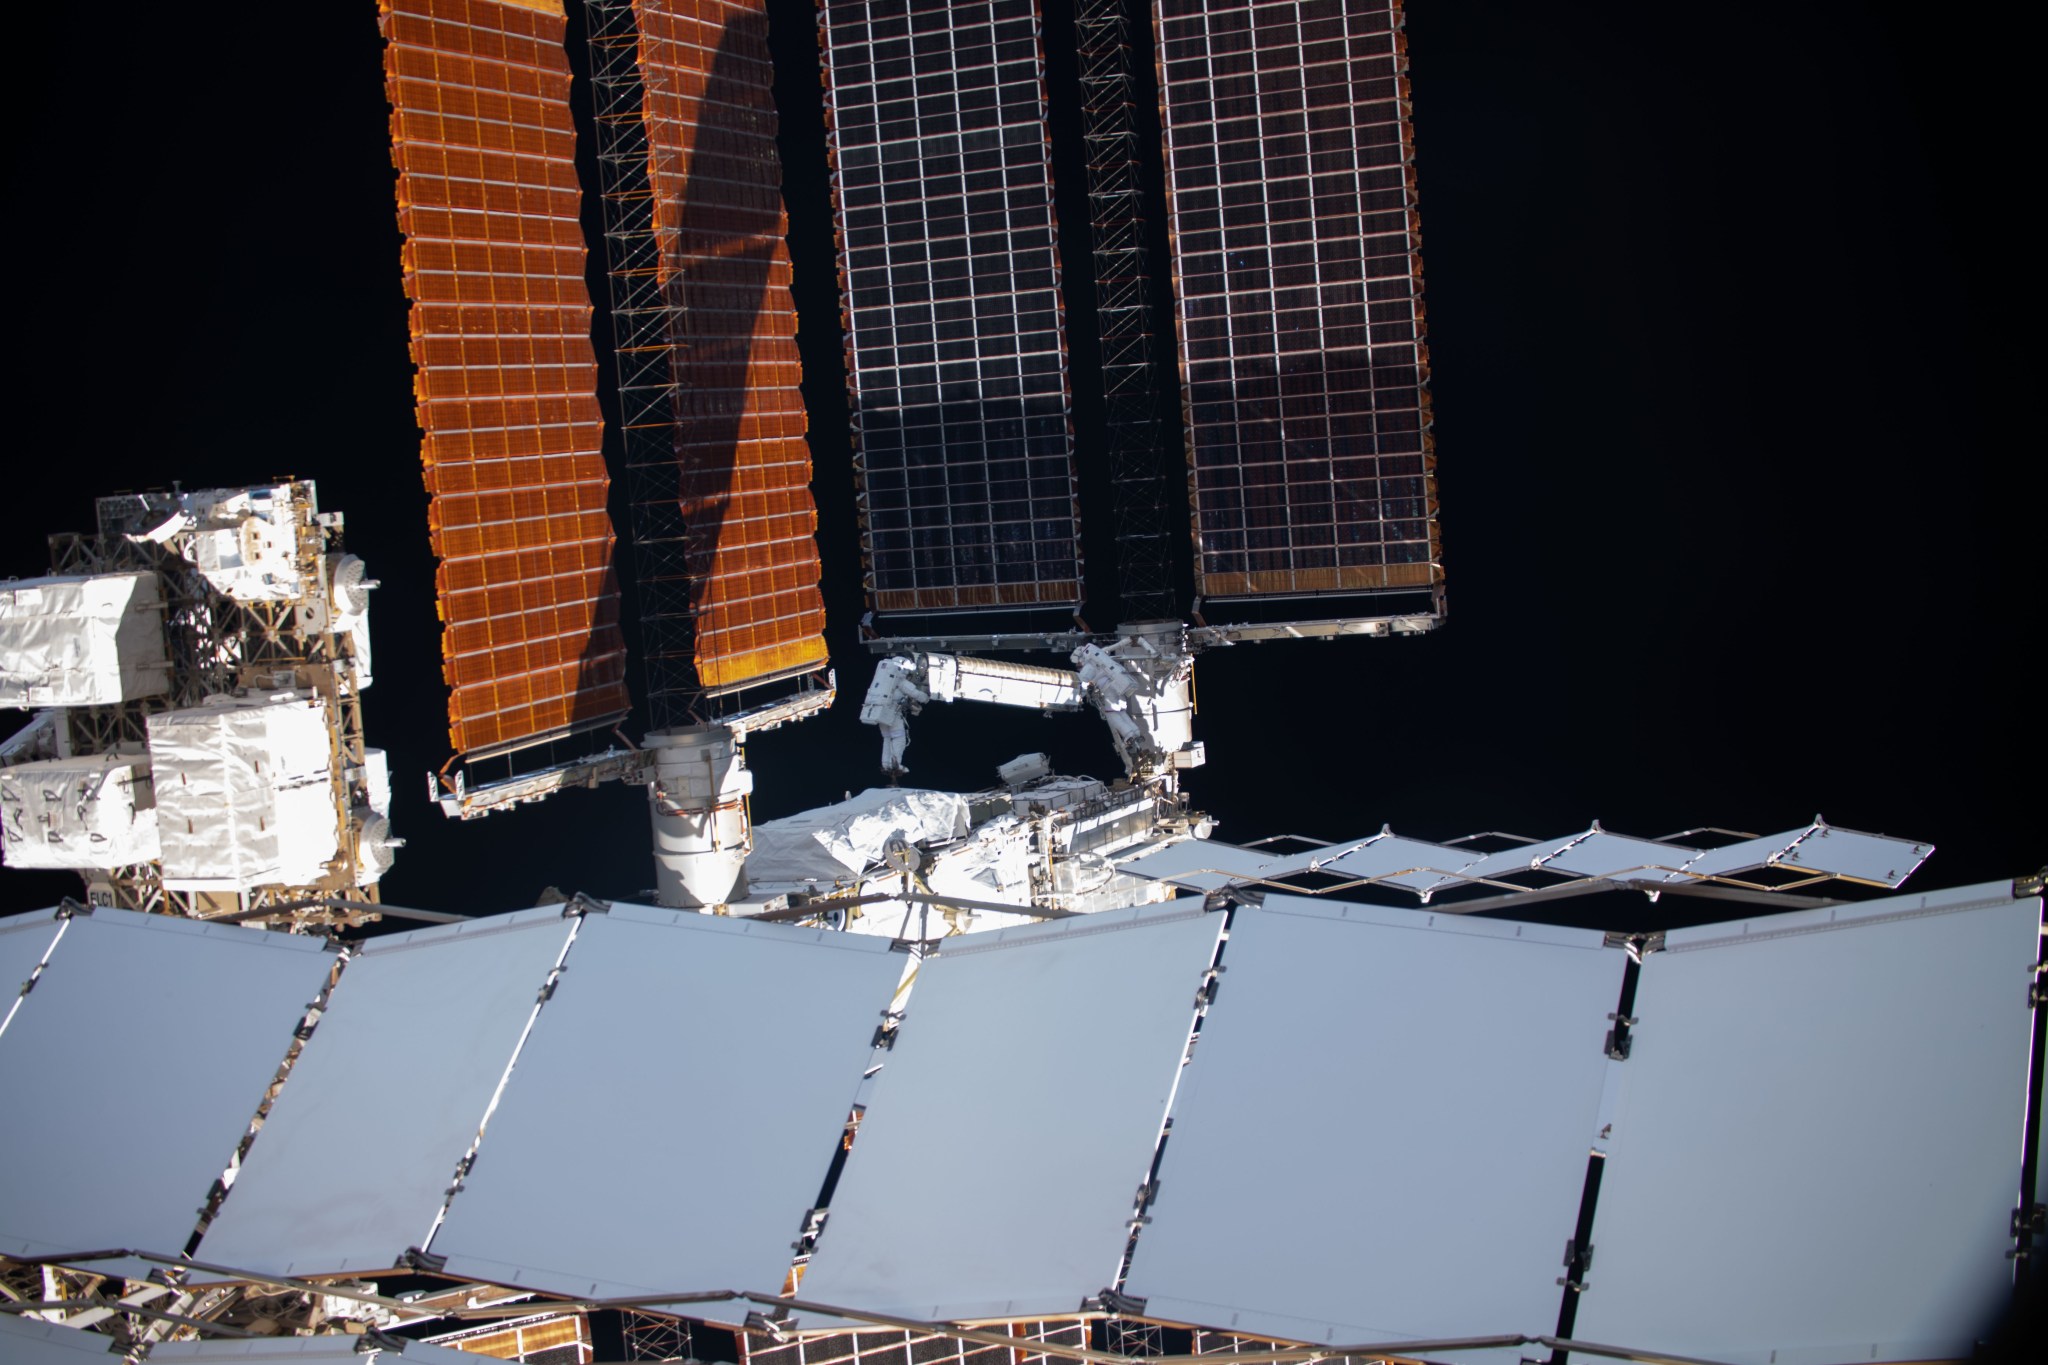 NASA astronaut Shane Kimbrough (left) and ESA (European Space Agency) astronaut Thomas Pesquet maneuver the first ISS Roll-Out Solar Array (iROSA) into place on the space station’s port 6 truss structure during a spacewalk June 16, 2021.